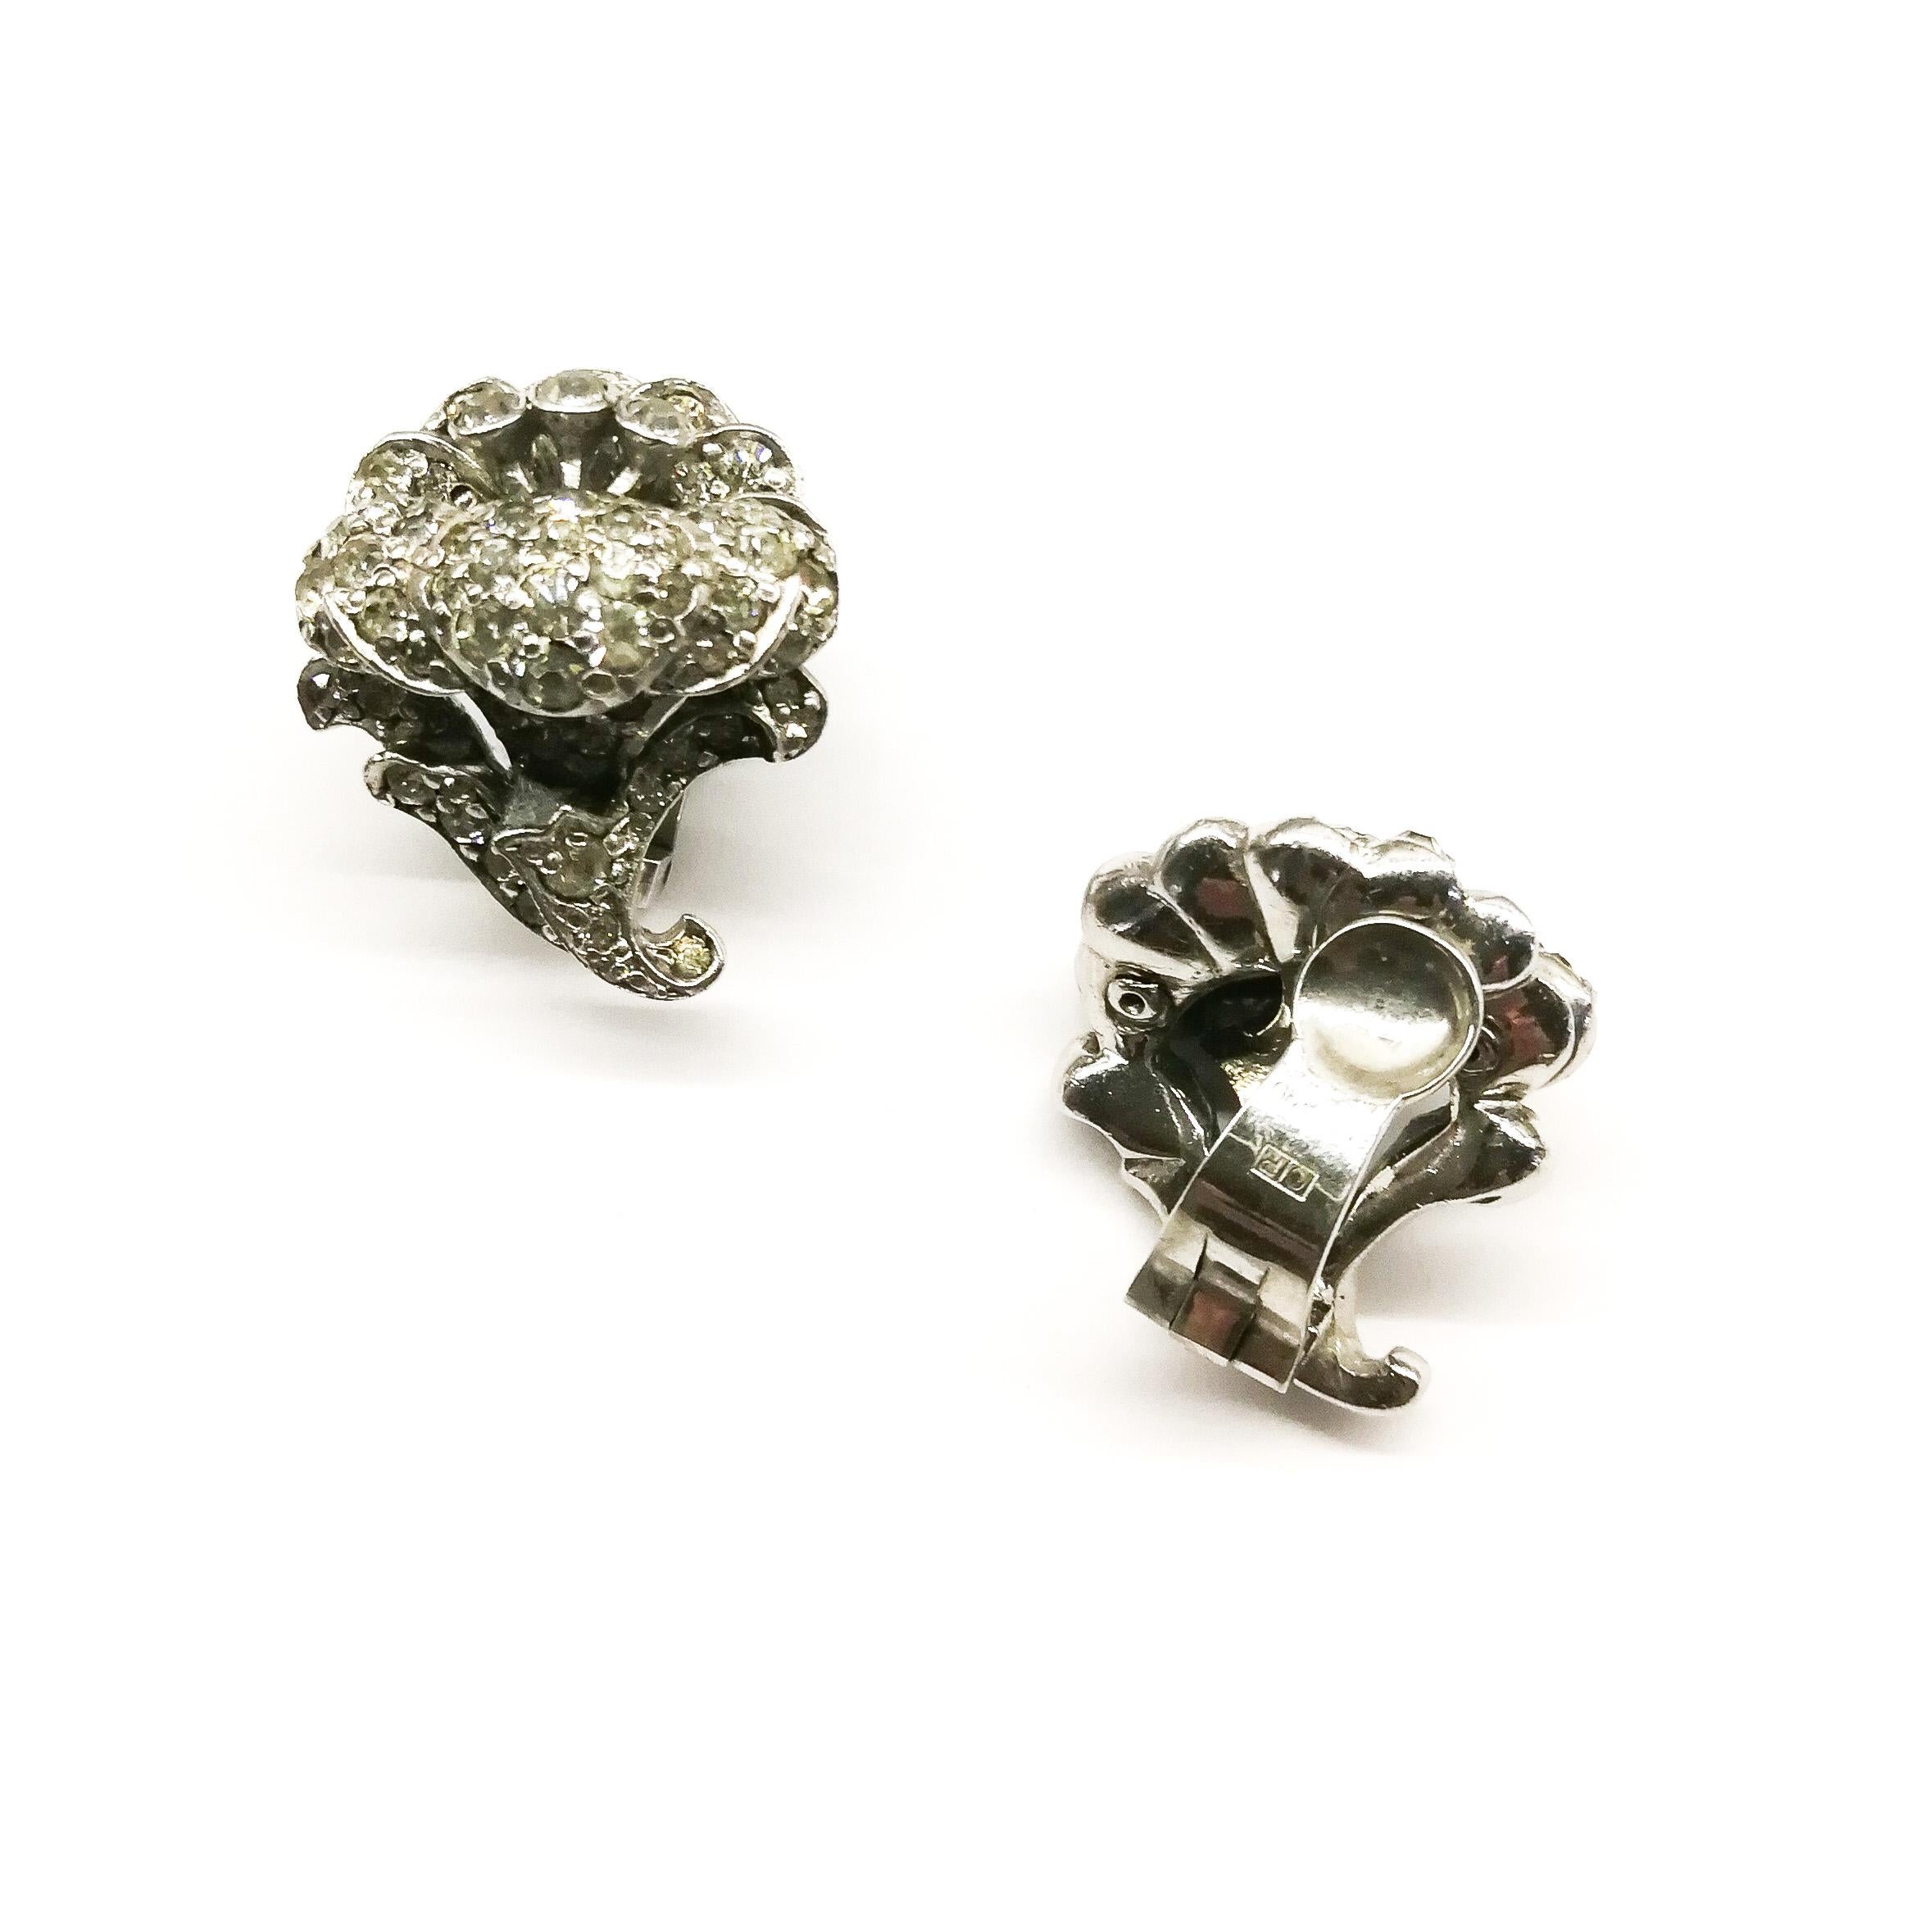 A classic pair of clear paste earrings, with overtones of Georgian and Victorian real jewellery, these smart floral style earrings by Ciro Of London are easily wearable and adaptable to many occasions.
CIRO was established in 1917 and continues its